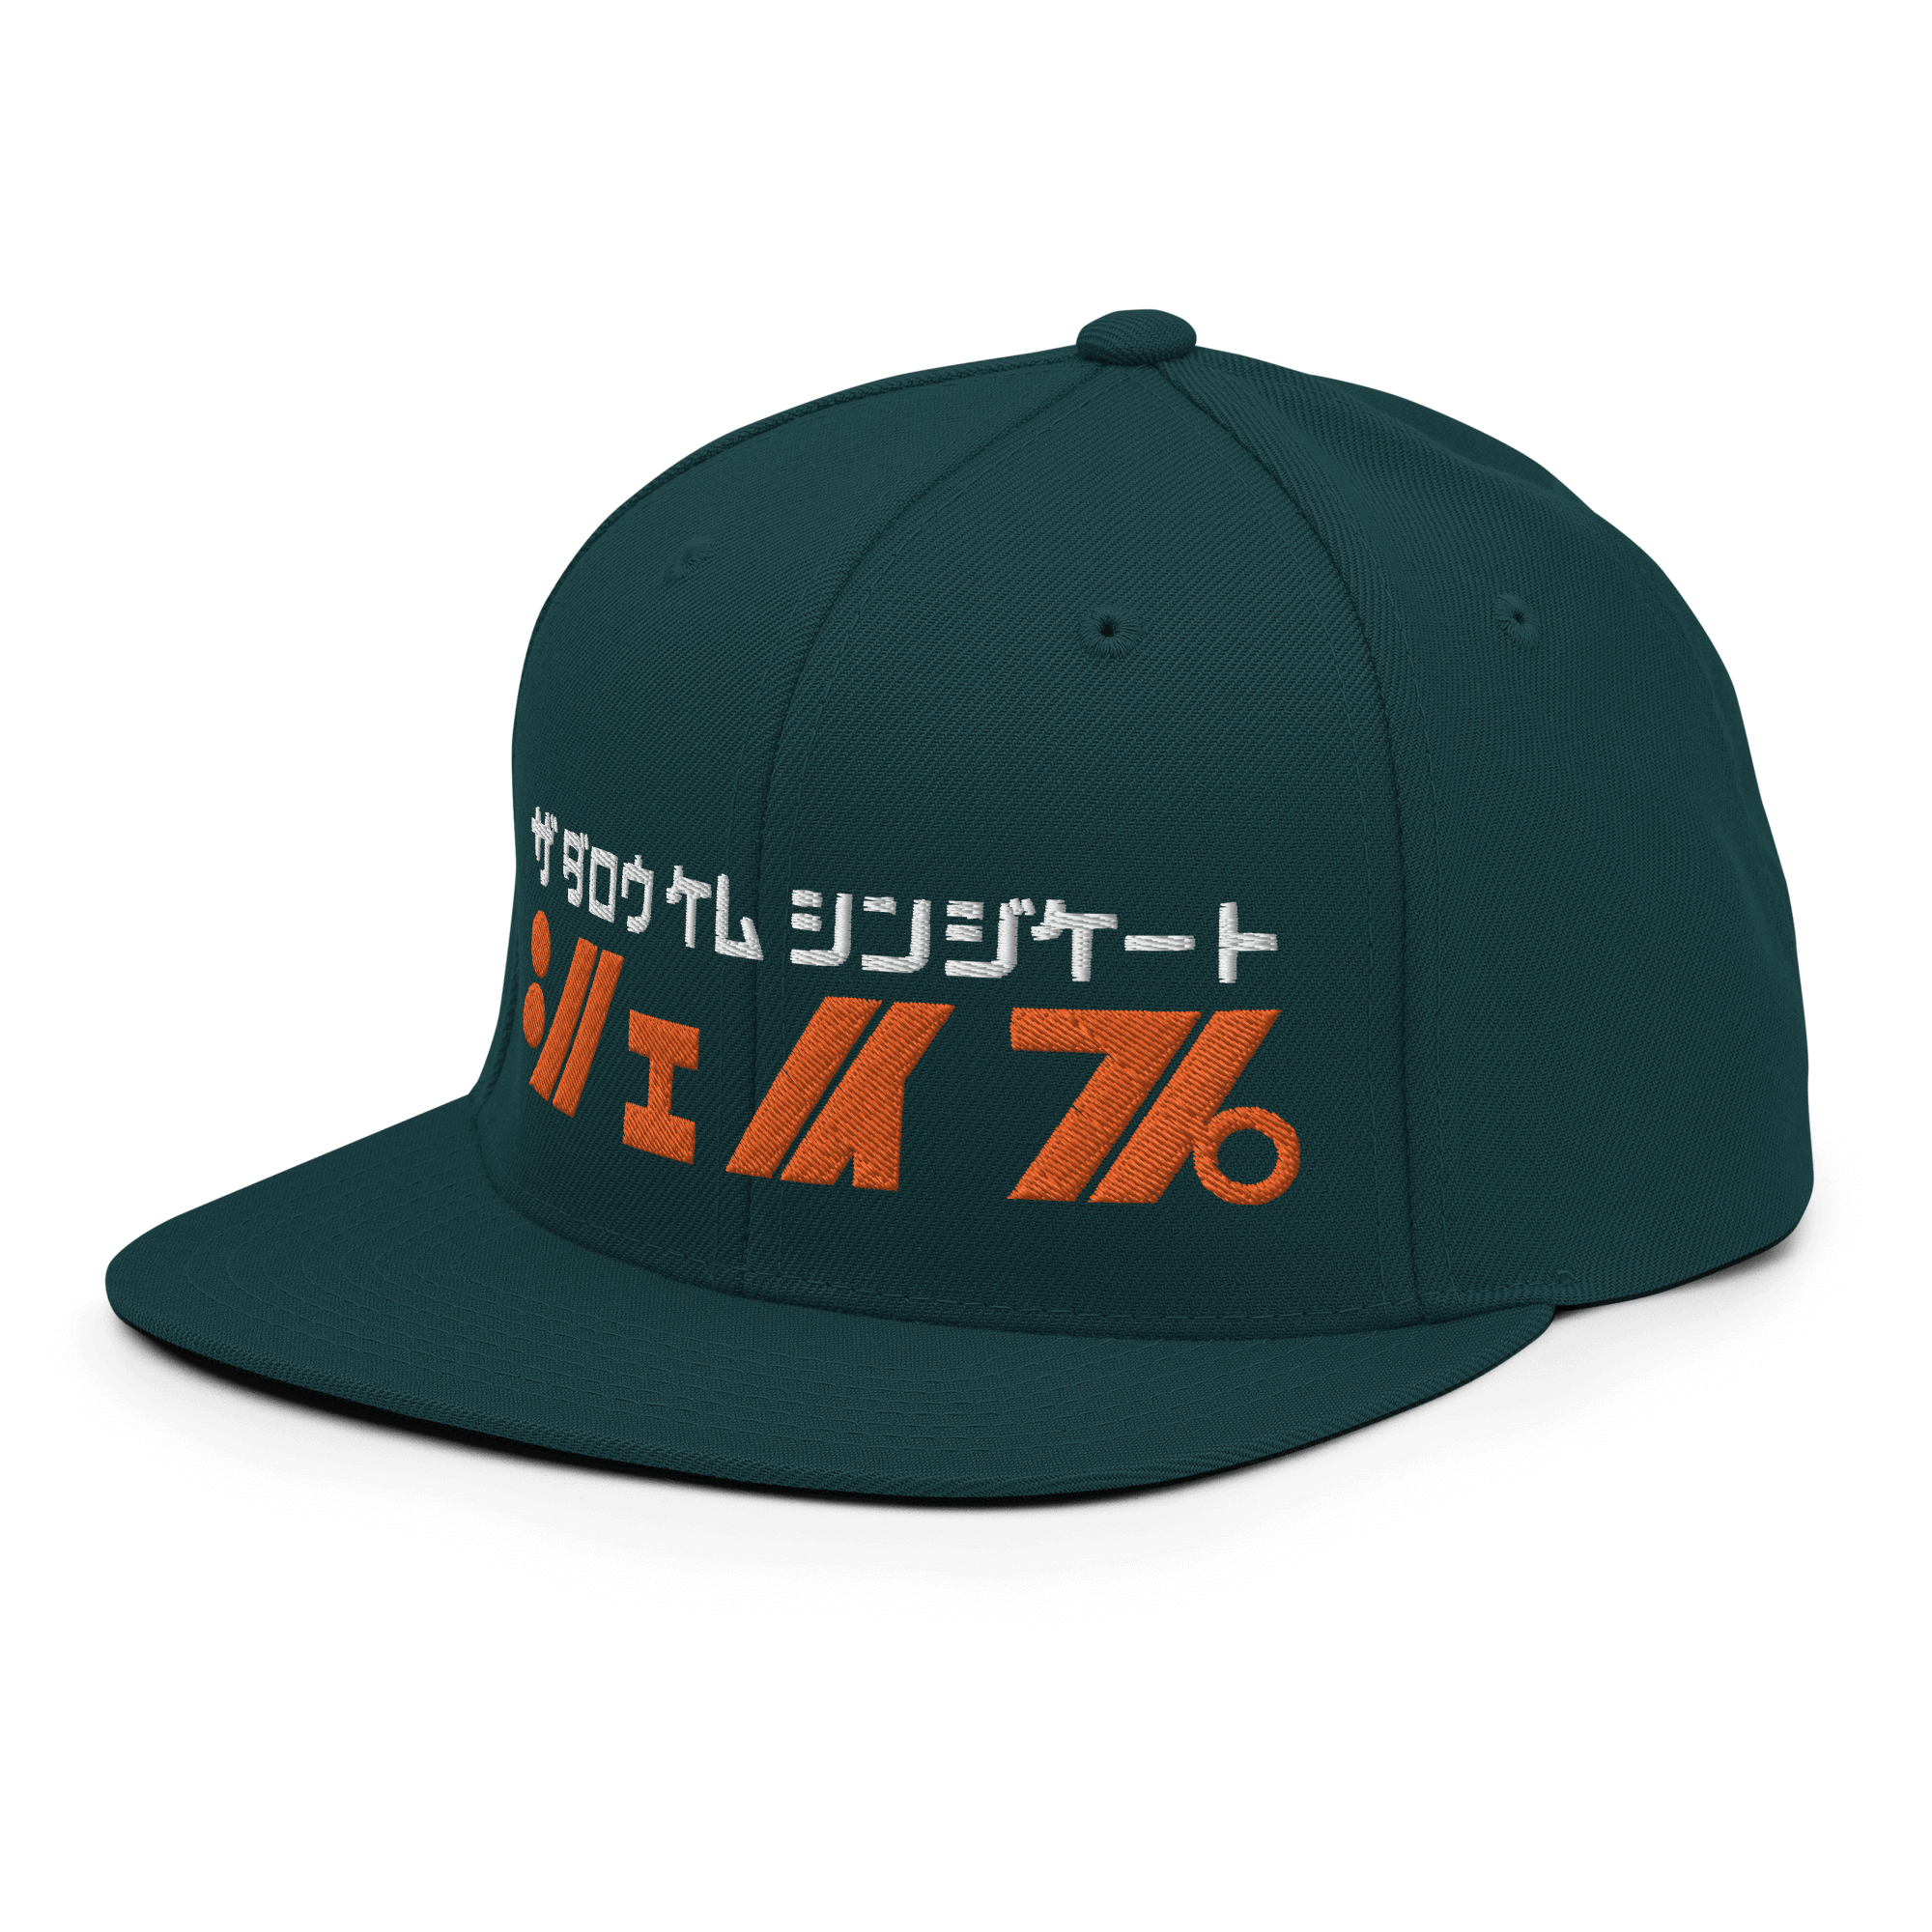 Shape Snapback CapElevate your style with the “Shape" Snapback Cap, a collaboration with The Darrow Chem Syndicate. Designed in a Japanese katakana retro font, it's a bold statement in classic fashion. The structured fit, flat brim, and adjustable snap cl